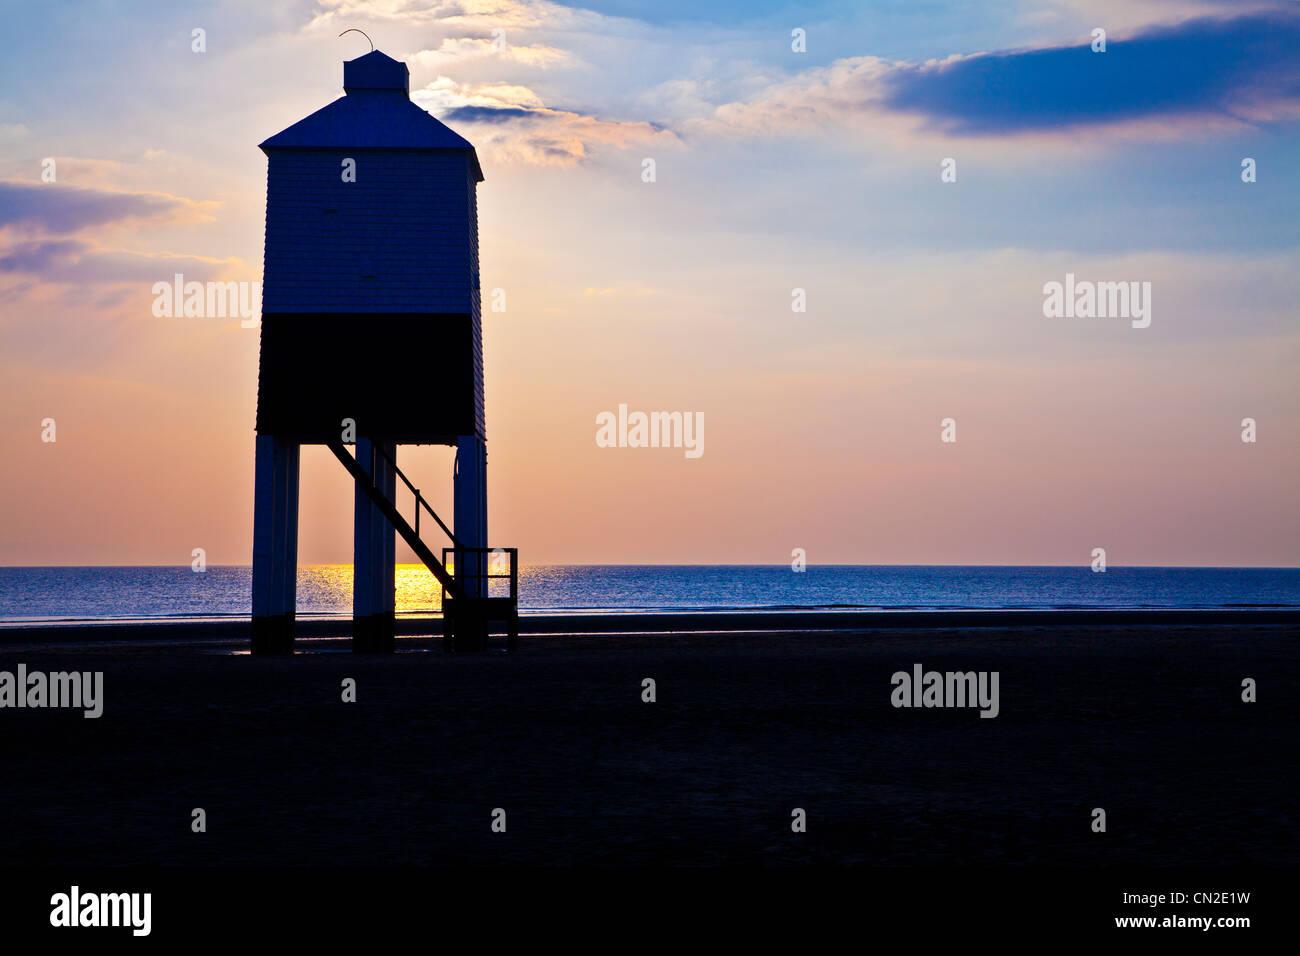 A contre jour shot against the light of the unusual lighthouse on stilts at Burnham-on-Sea, Somerset, England, UK, at sunset. Stock Photo